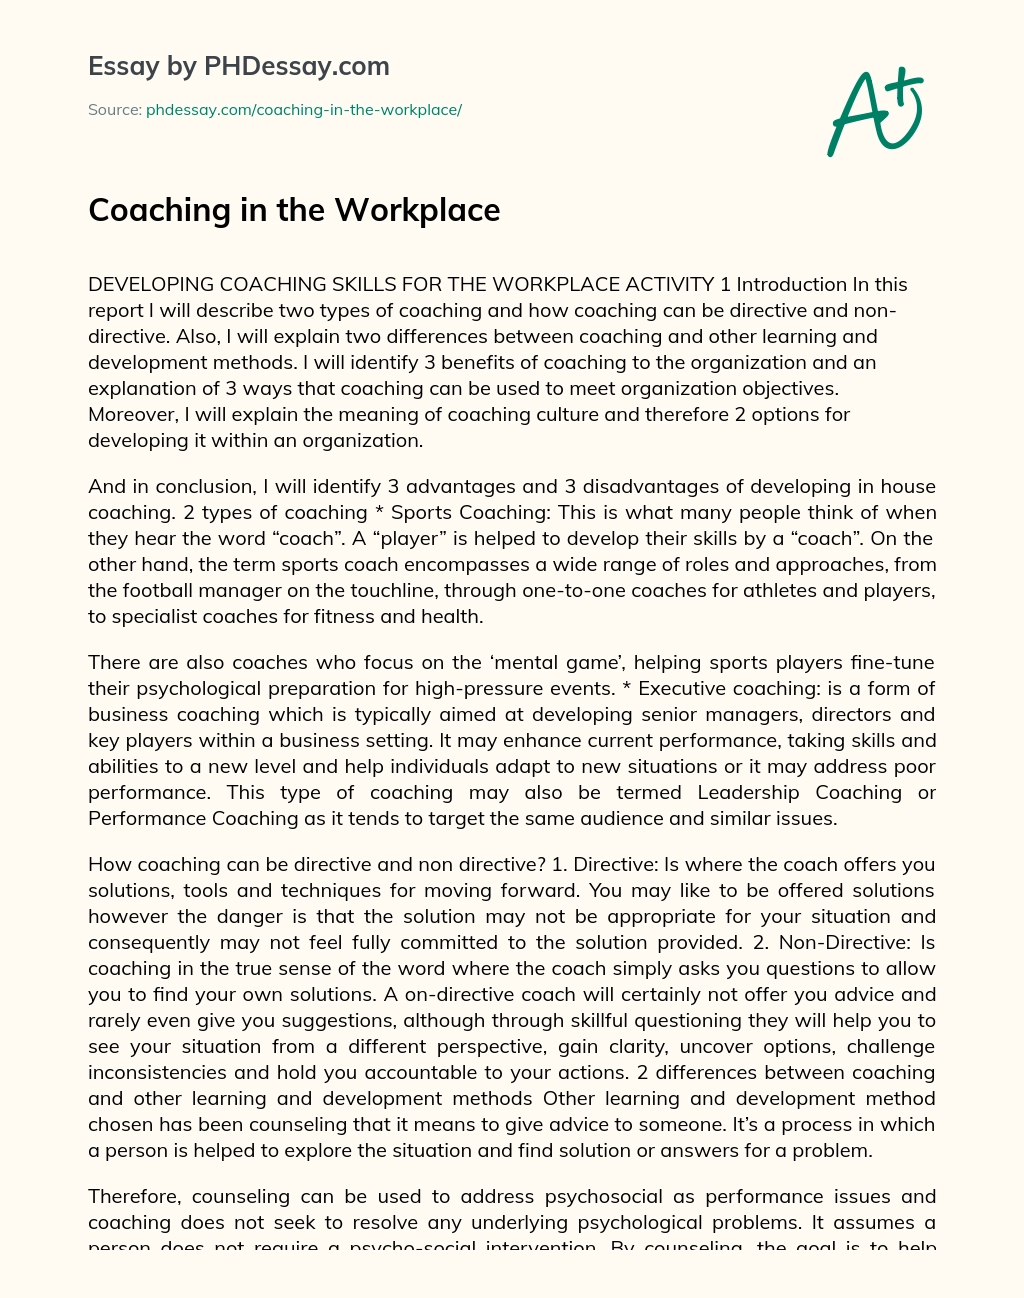 Coaching in the Workplace essay